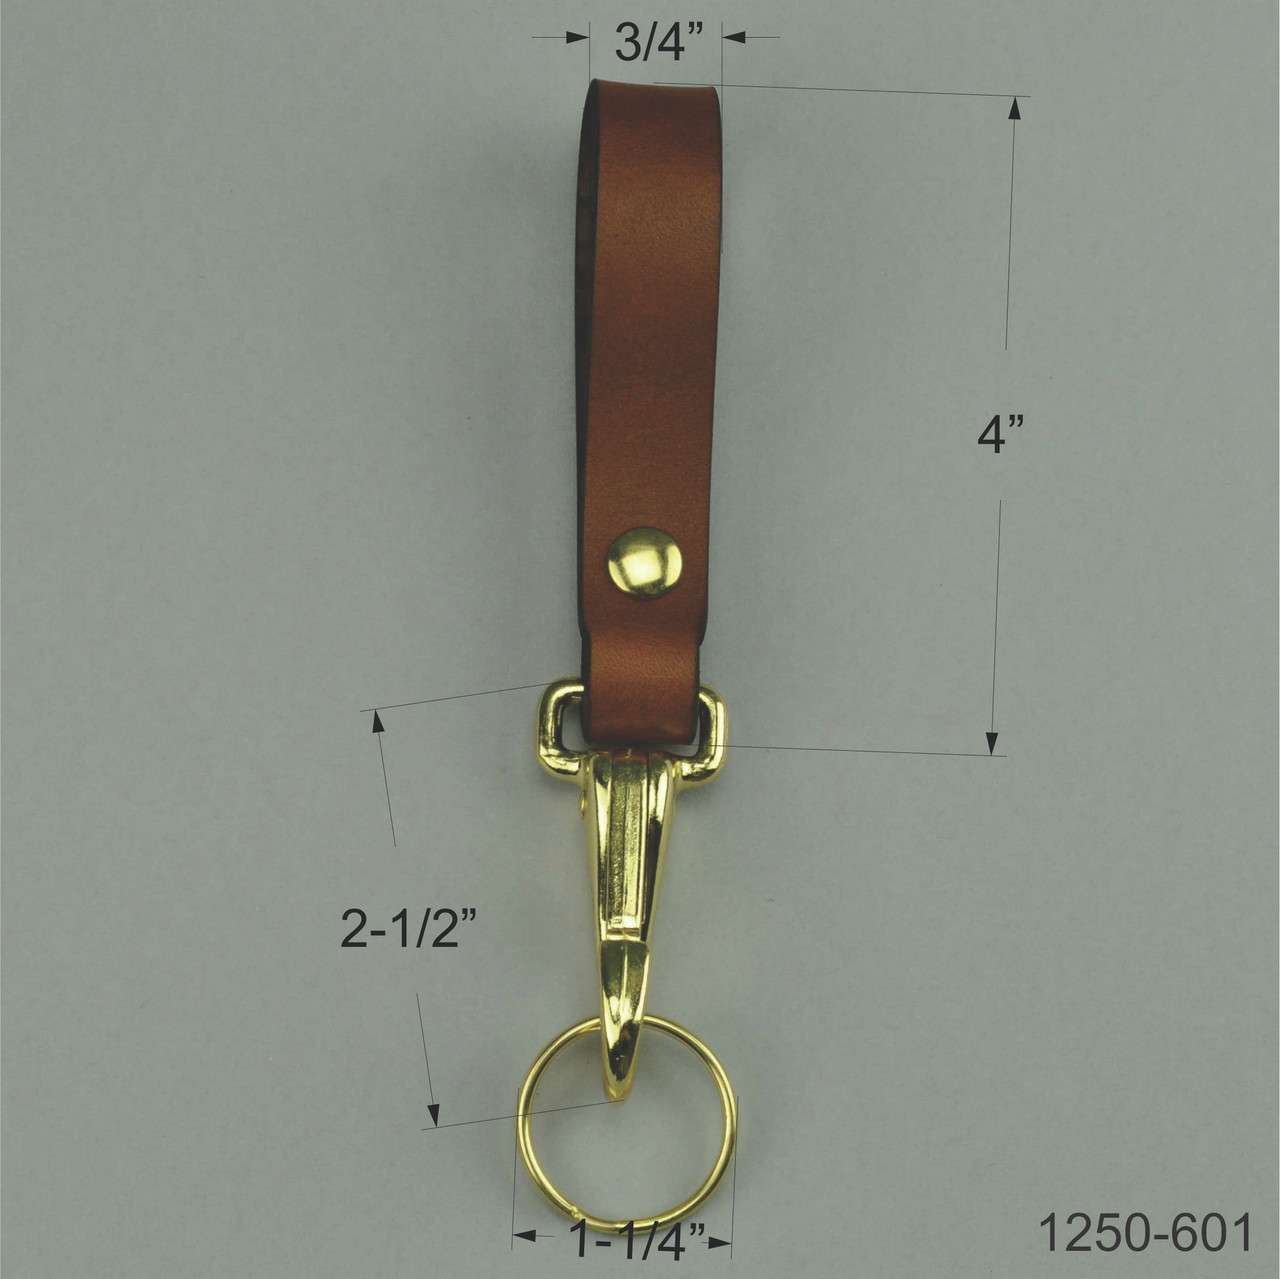 Leather Rope Key Holder S00 - Accessories